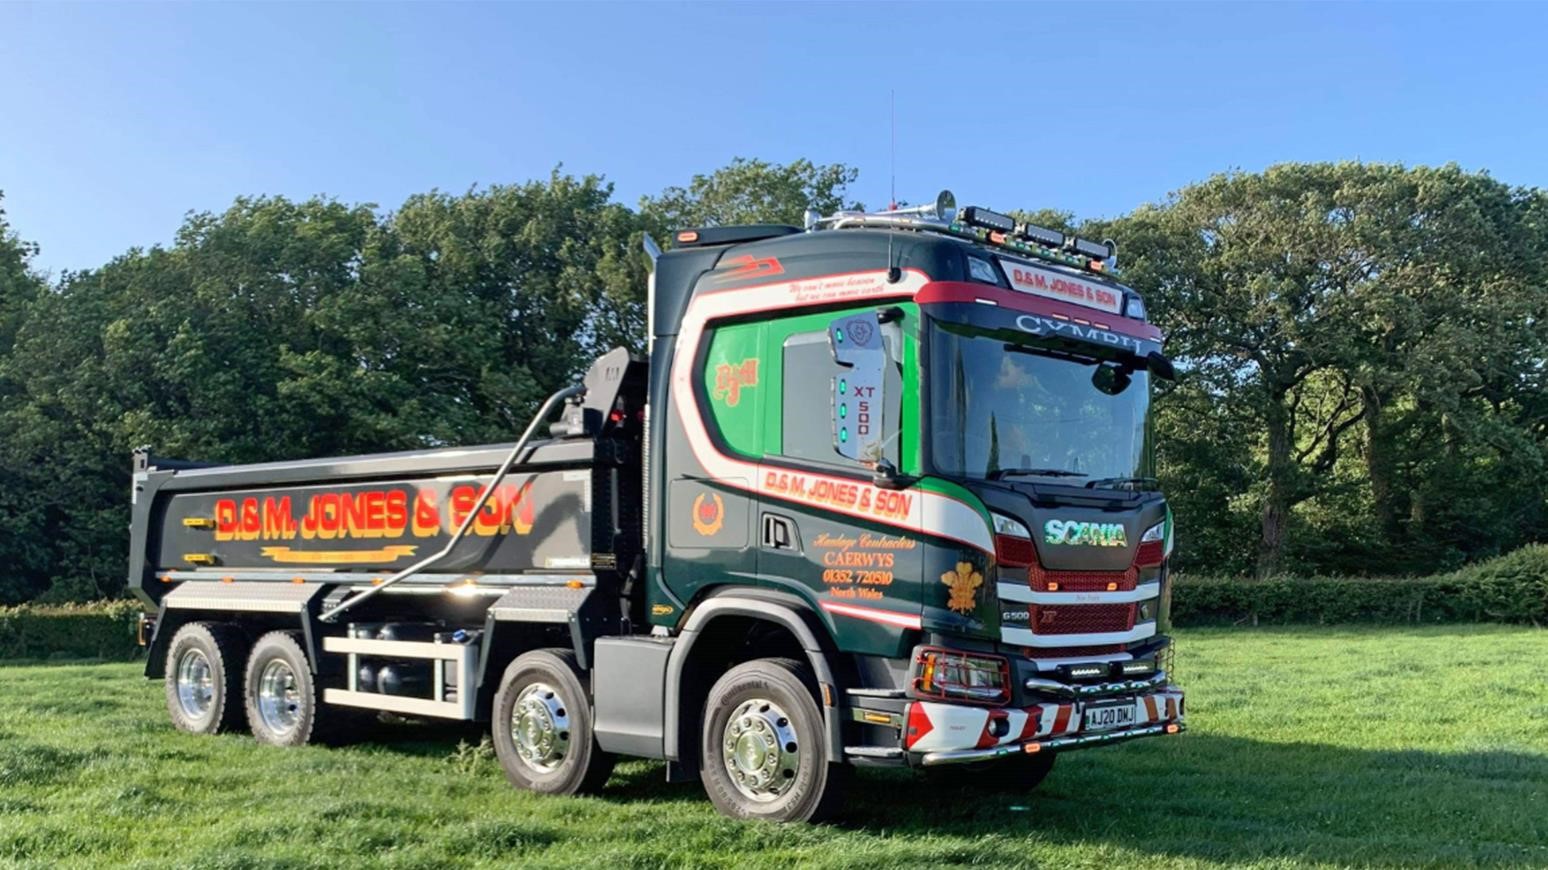 D&M Jones & Son’s Tipper Trucks, Including A New Scania G 500 XT, Pull Double Duty As Moving Advertisements